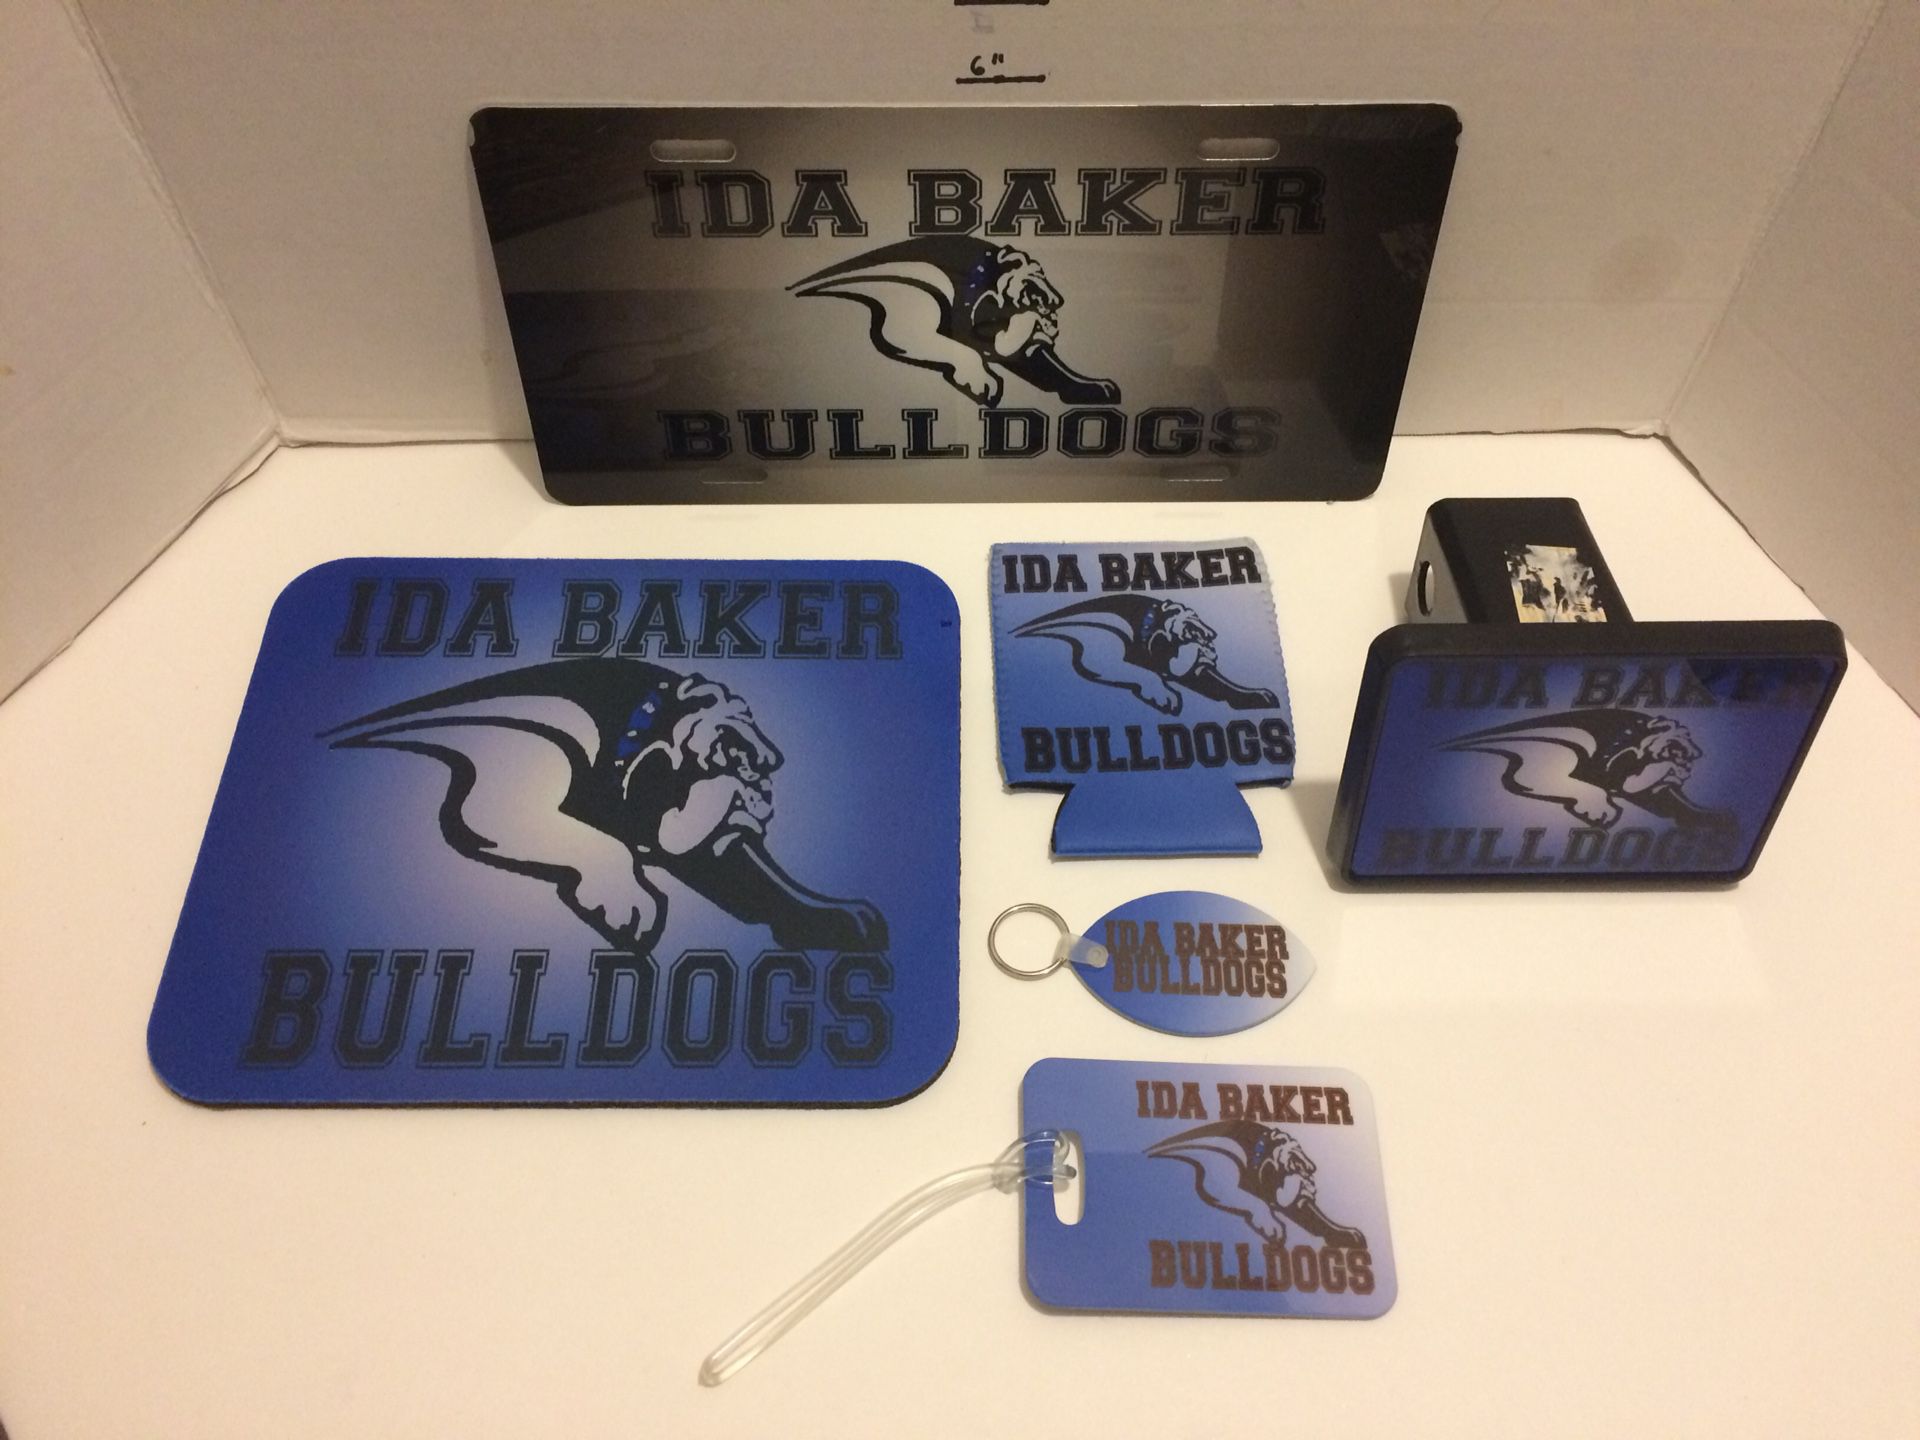 Ida baker HS bulldogs lot of 6 items keychain license plate mouse pad can koozie luggage tag